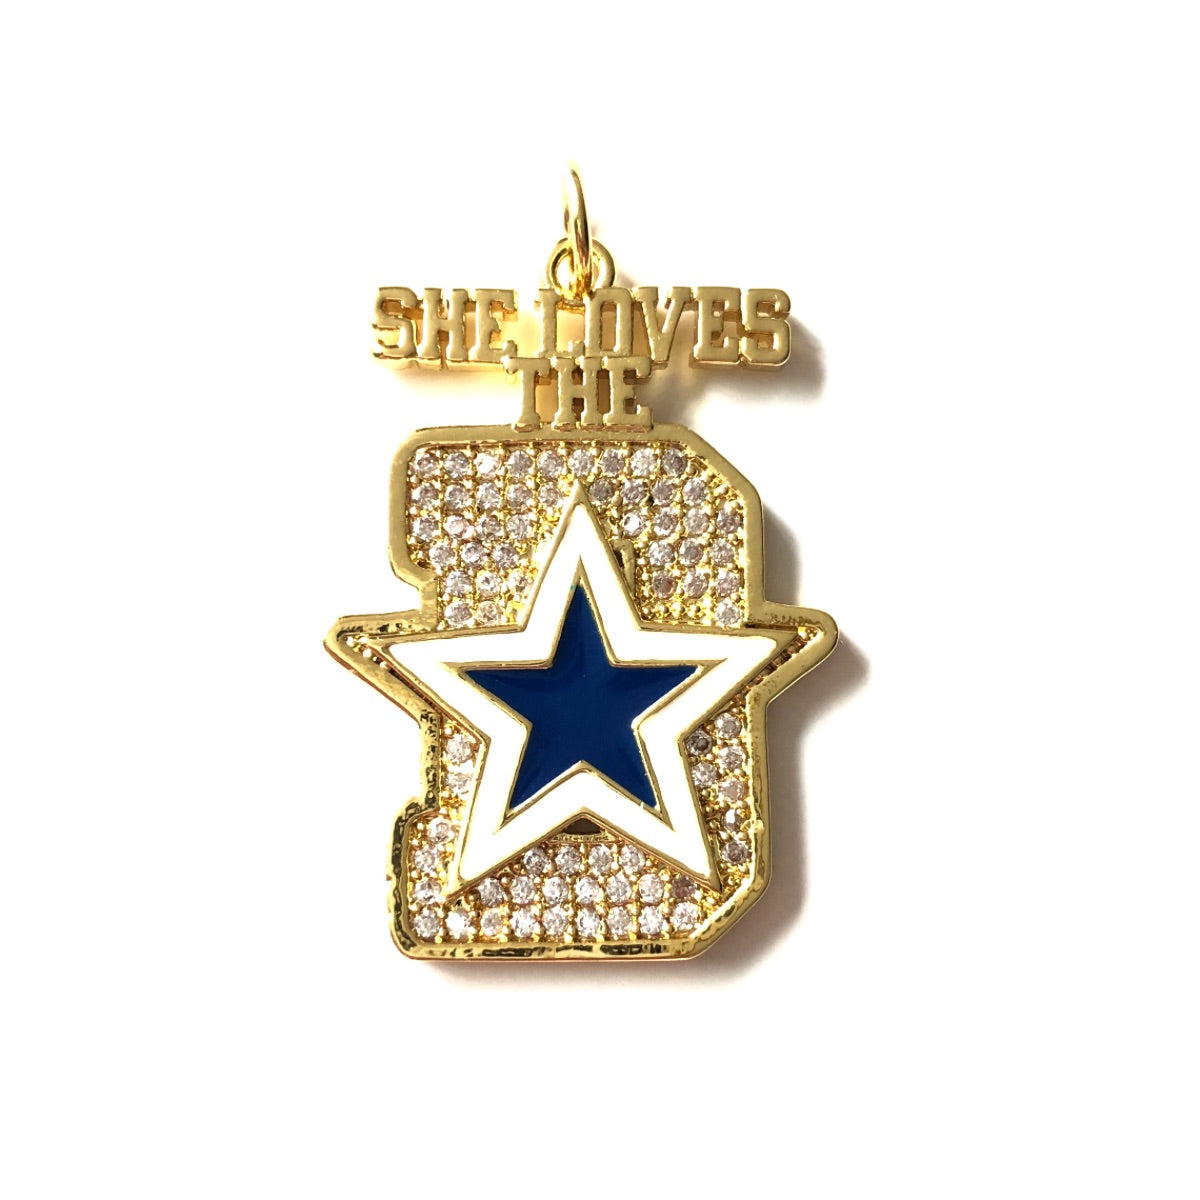 10pcs/lot 35*25mm Cowboys Star CZ Paved She Loves The D Word Charms Gold CZ Paved Charms American Football Sports New Charms Arrivals Charms Beads Beyond